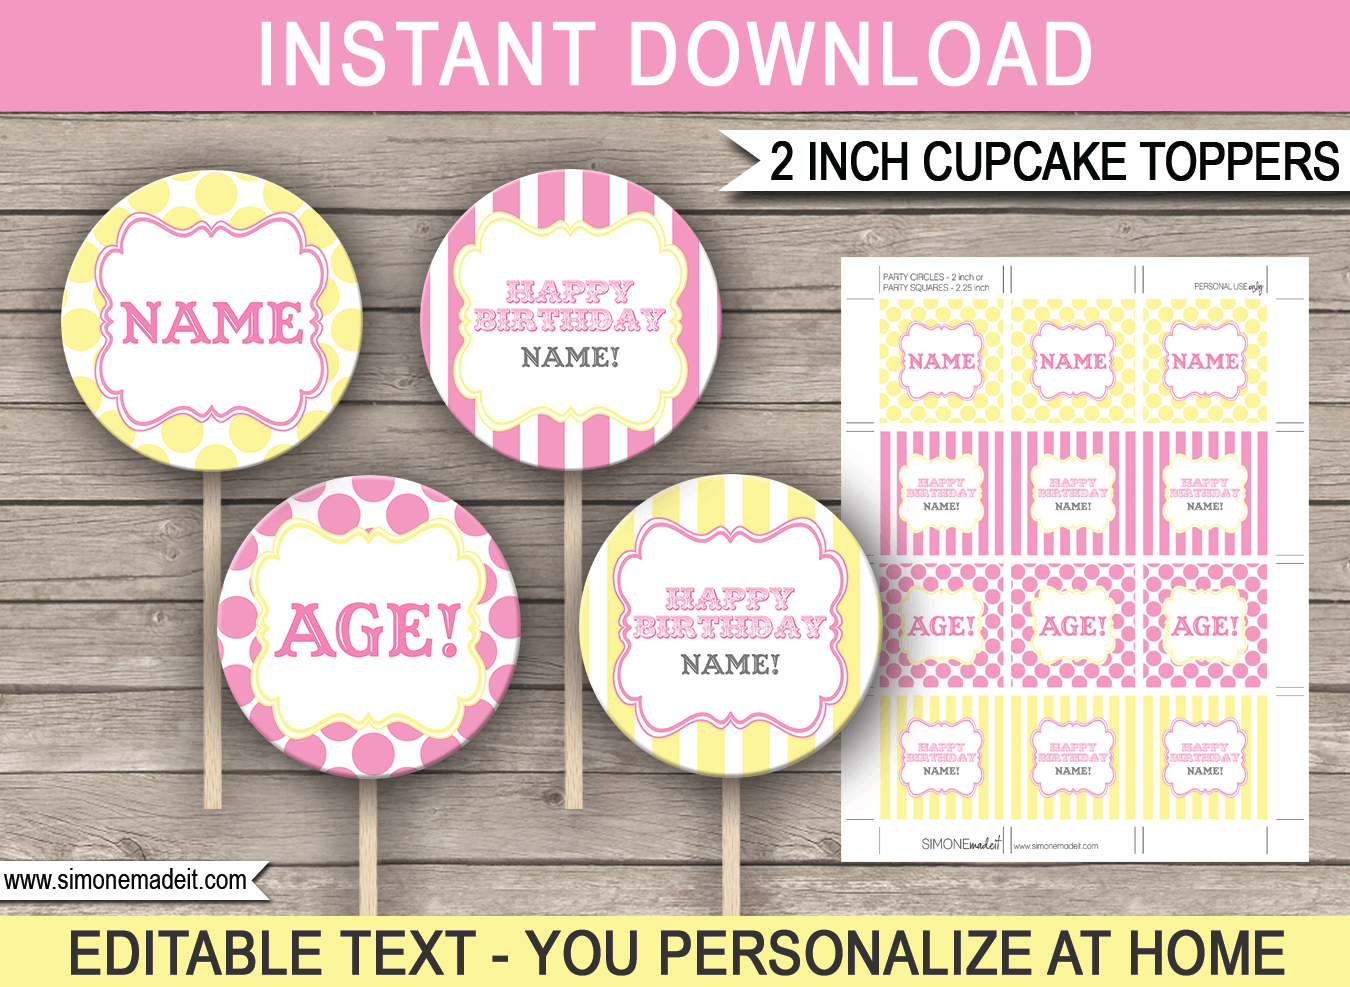 Printable Pink & Yellow Carnival Party Cupcake Toppers | Circus Theme Decorations | 2 inch | Gift Tags | DIY Editable & Printable Template | INSTANT DOWNLOAD via simonemadeit.com